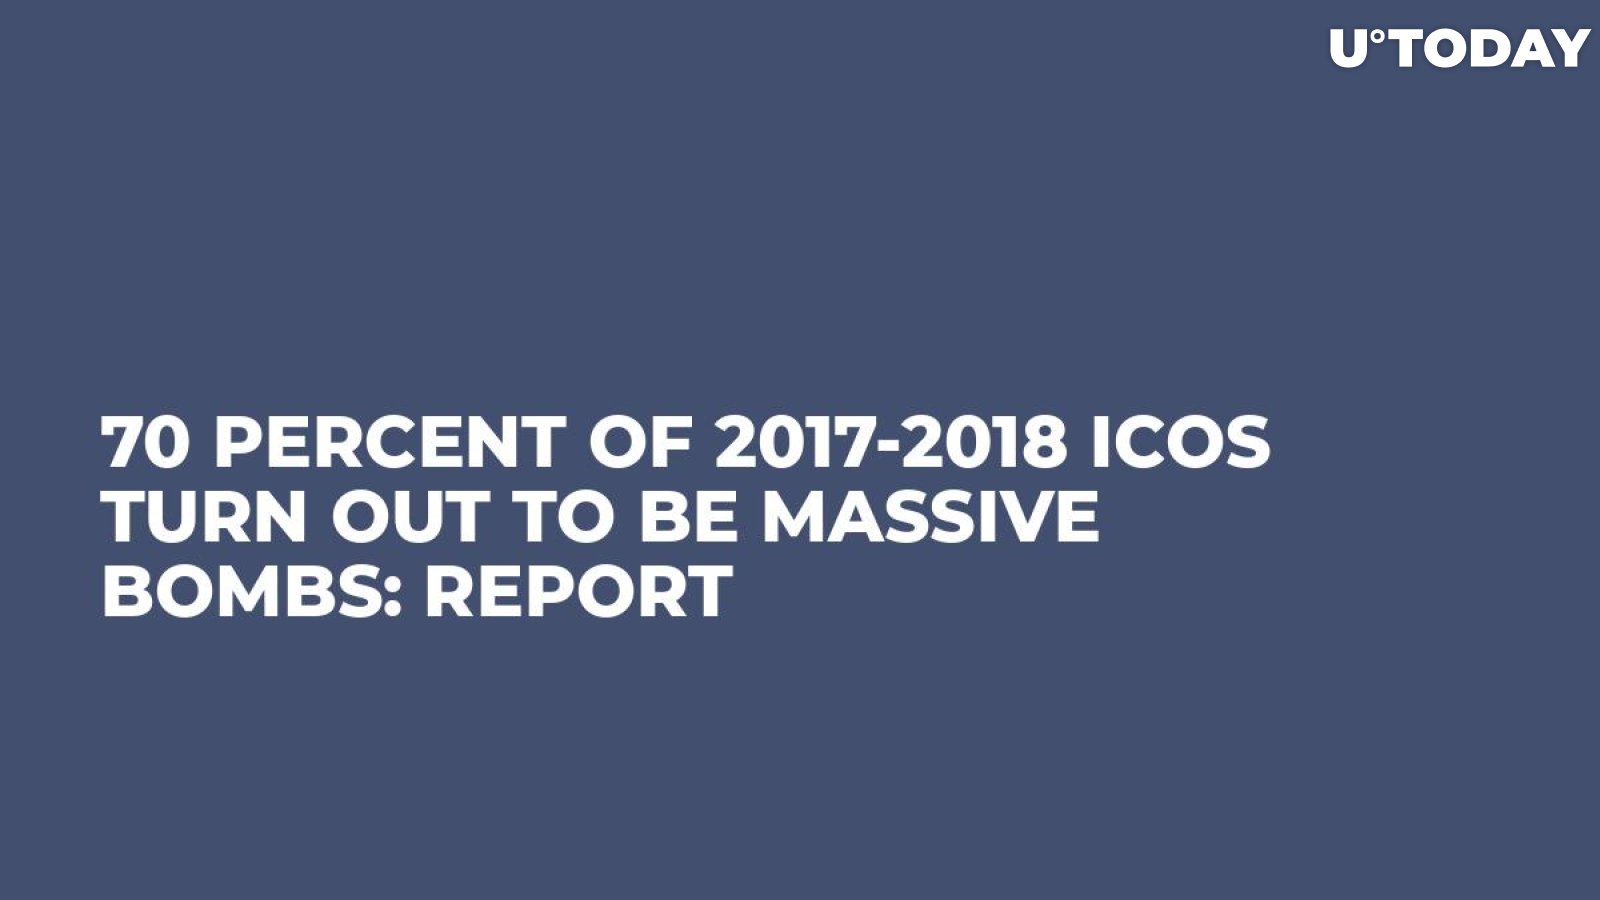 70 Percent of 2017-2018 ICOs Turn Out to Be Massive Bombs: Report 